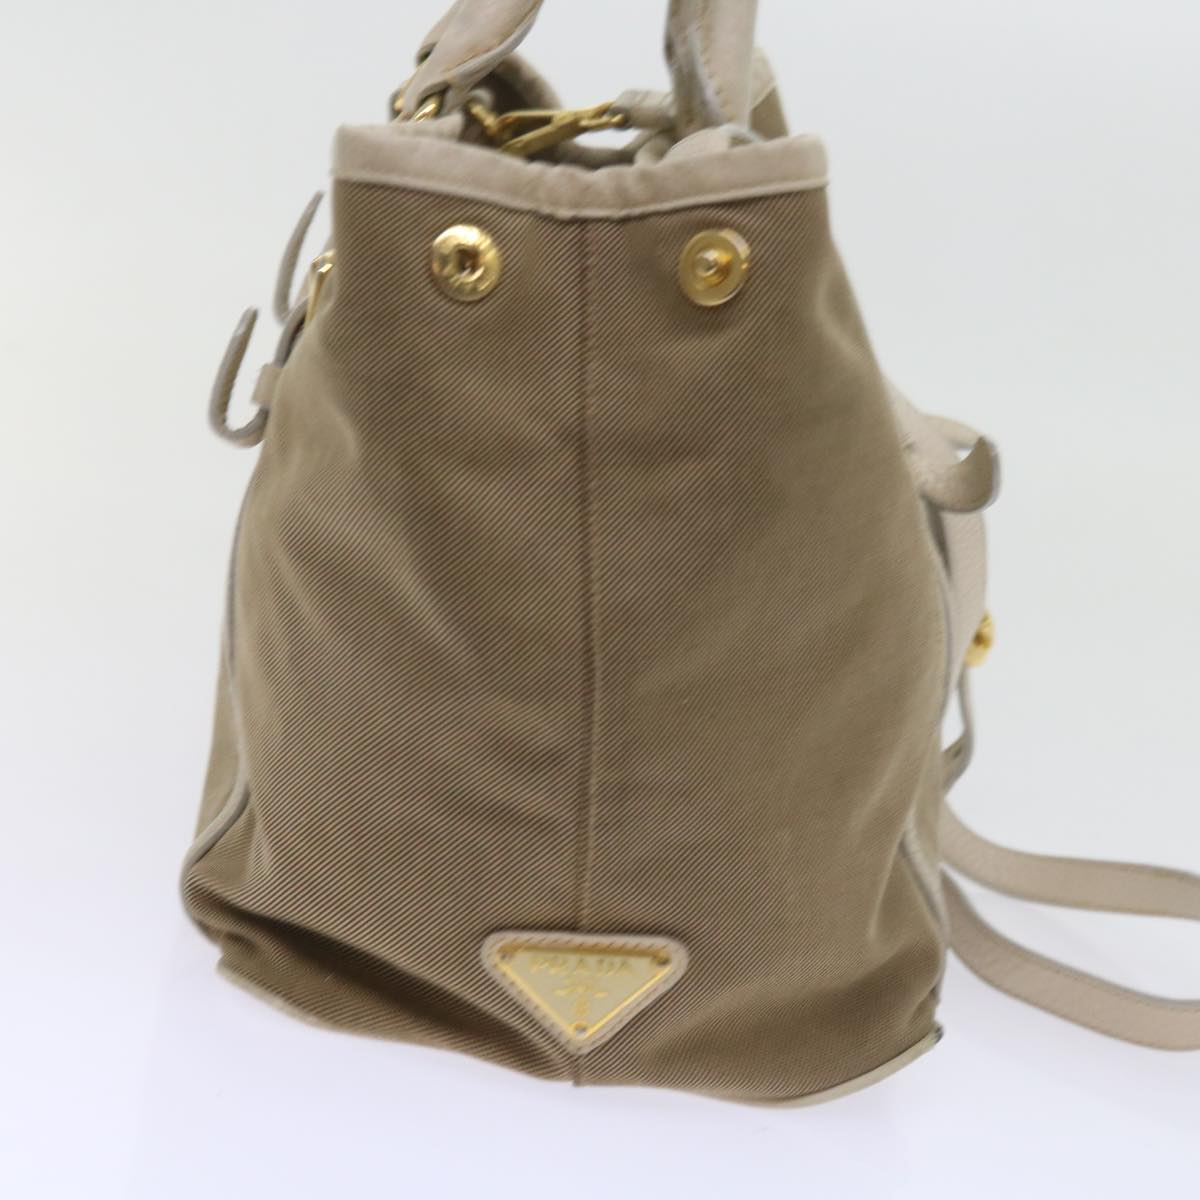 PRADA Hand Bag Canvas Leather 2way Brown Auth bs10386